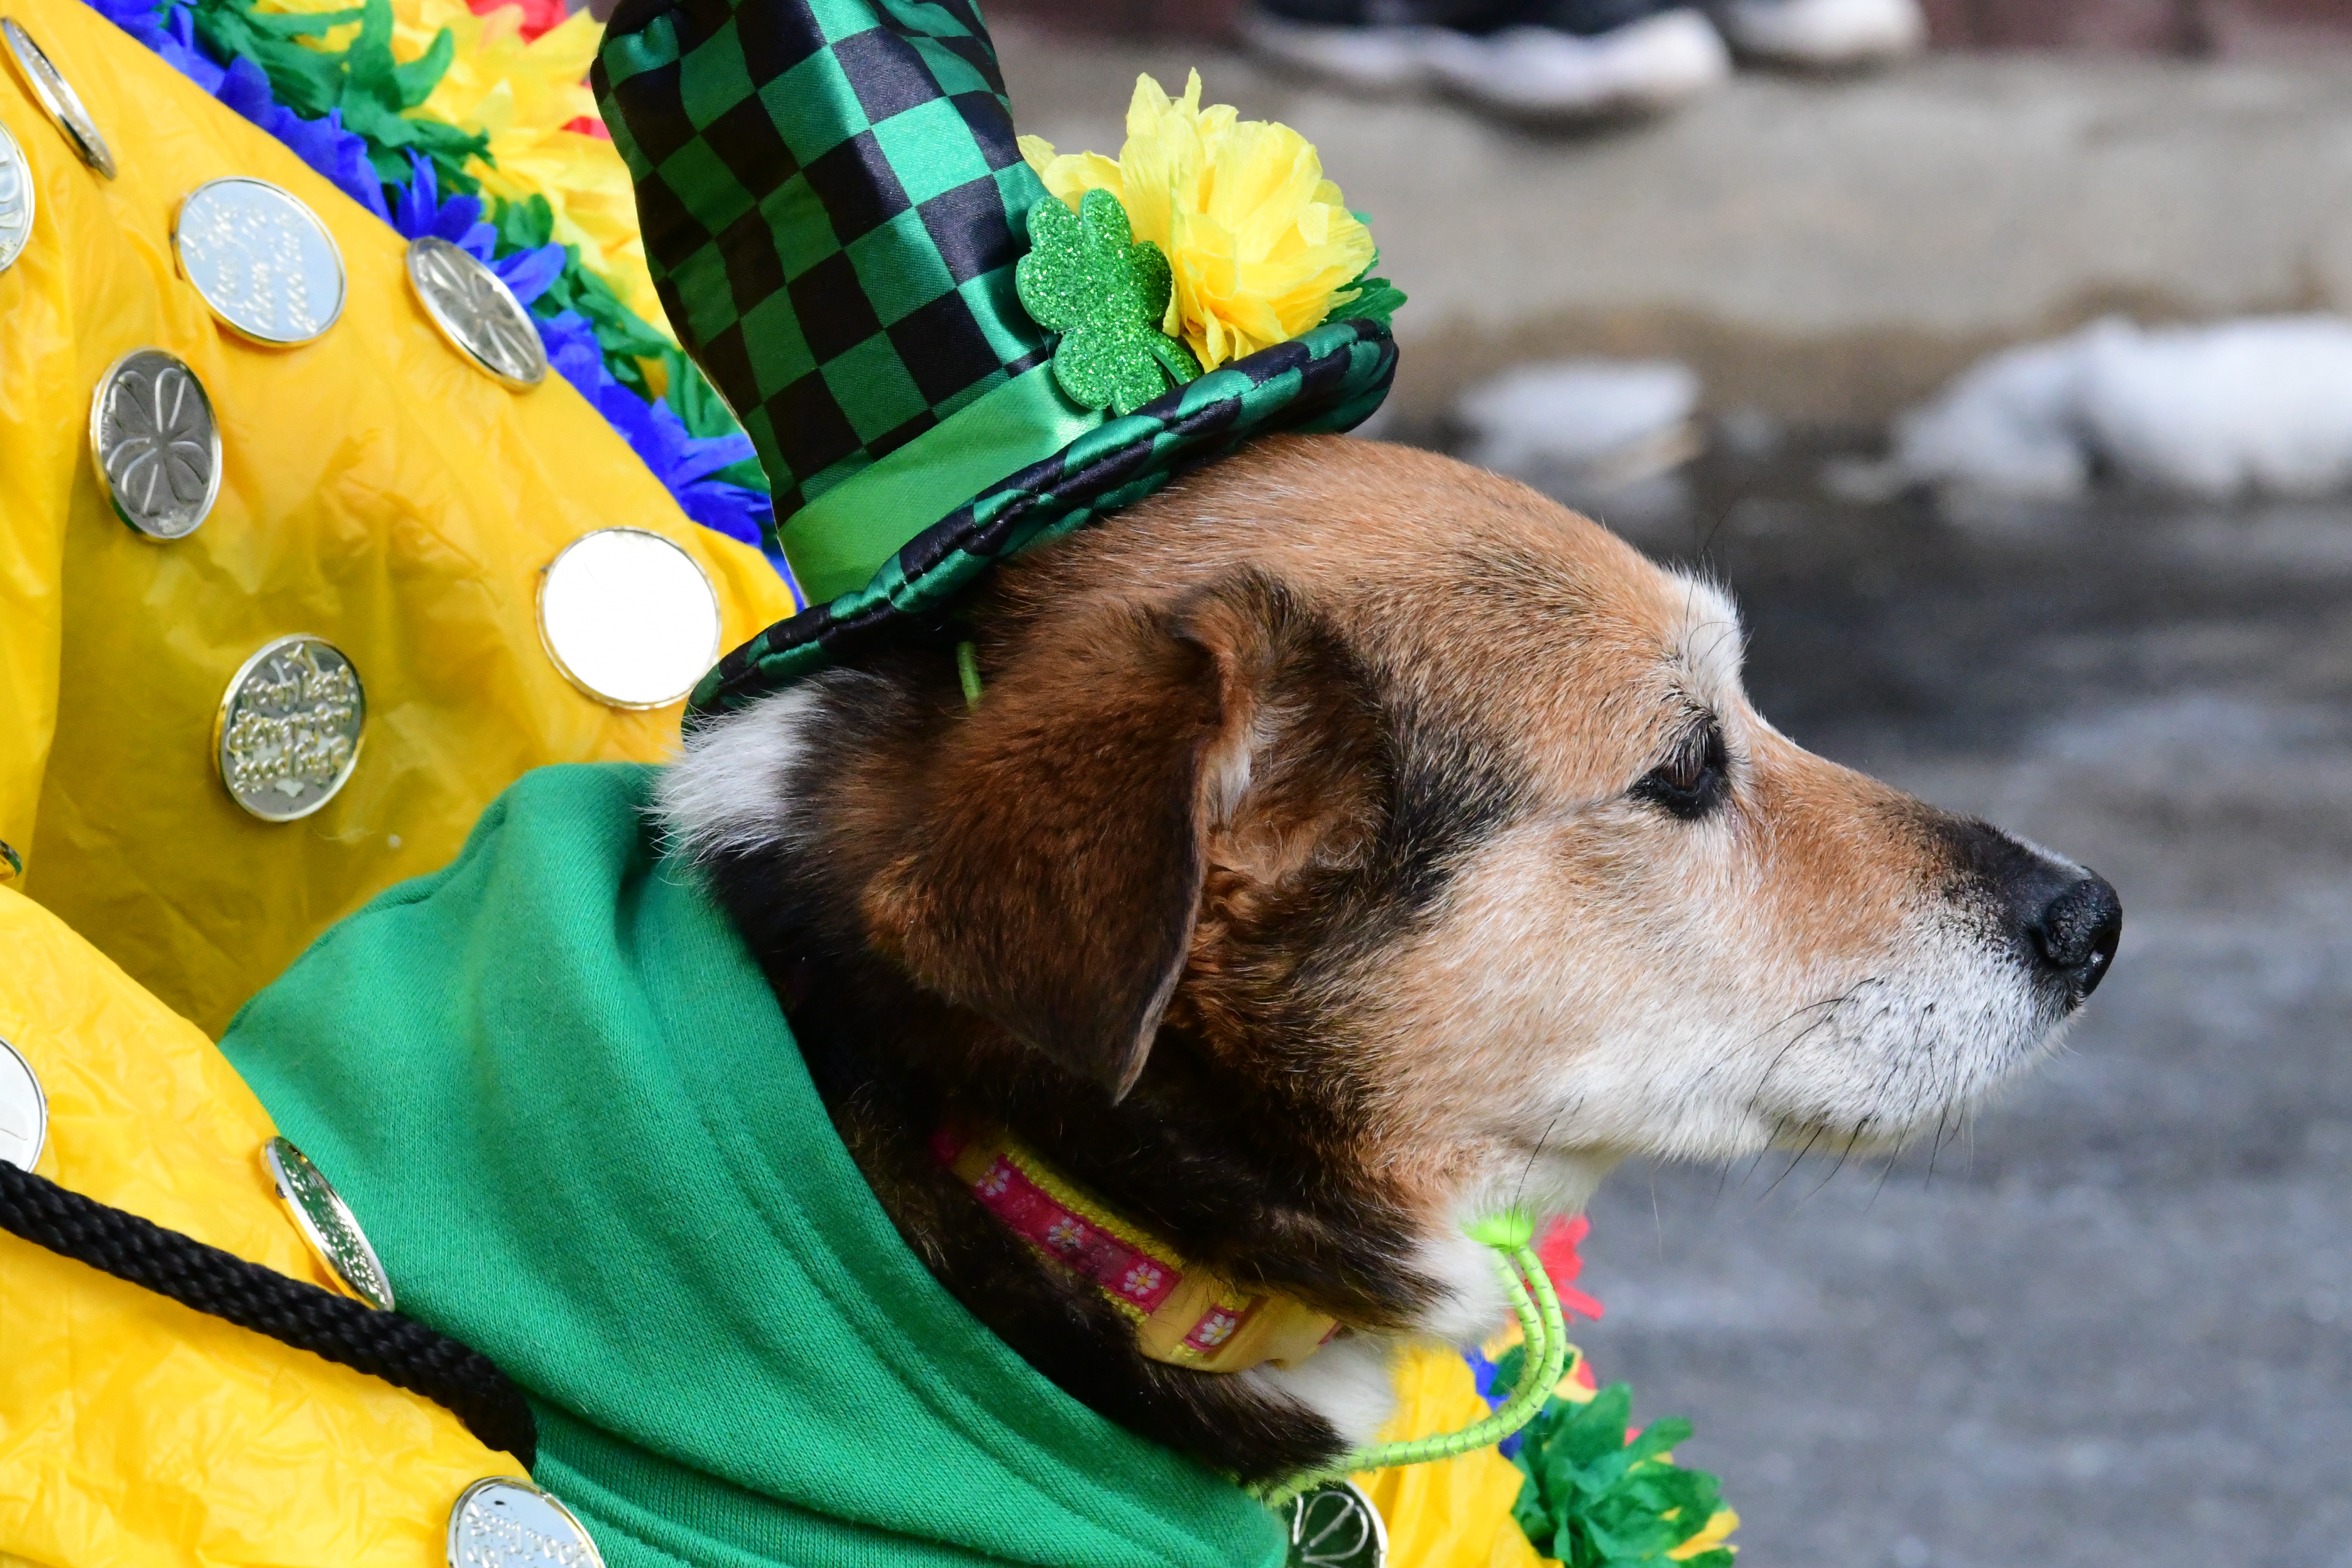 The 2022 St Patrick's Day Parade hosted by the Friendly Sons of St Patrick Hunterdon County took place in Clinton on March 13 , 2022

Adopt a Setter/Irish Setter Rescue